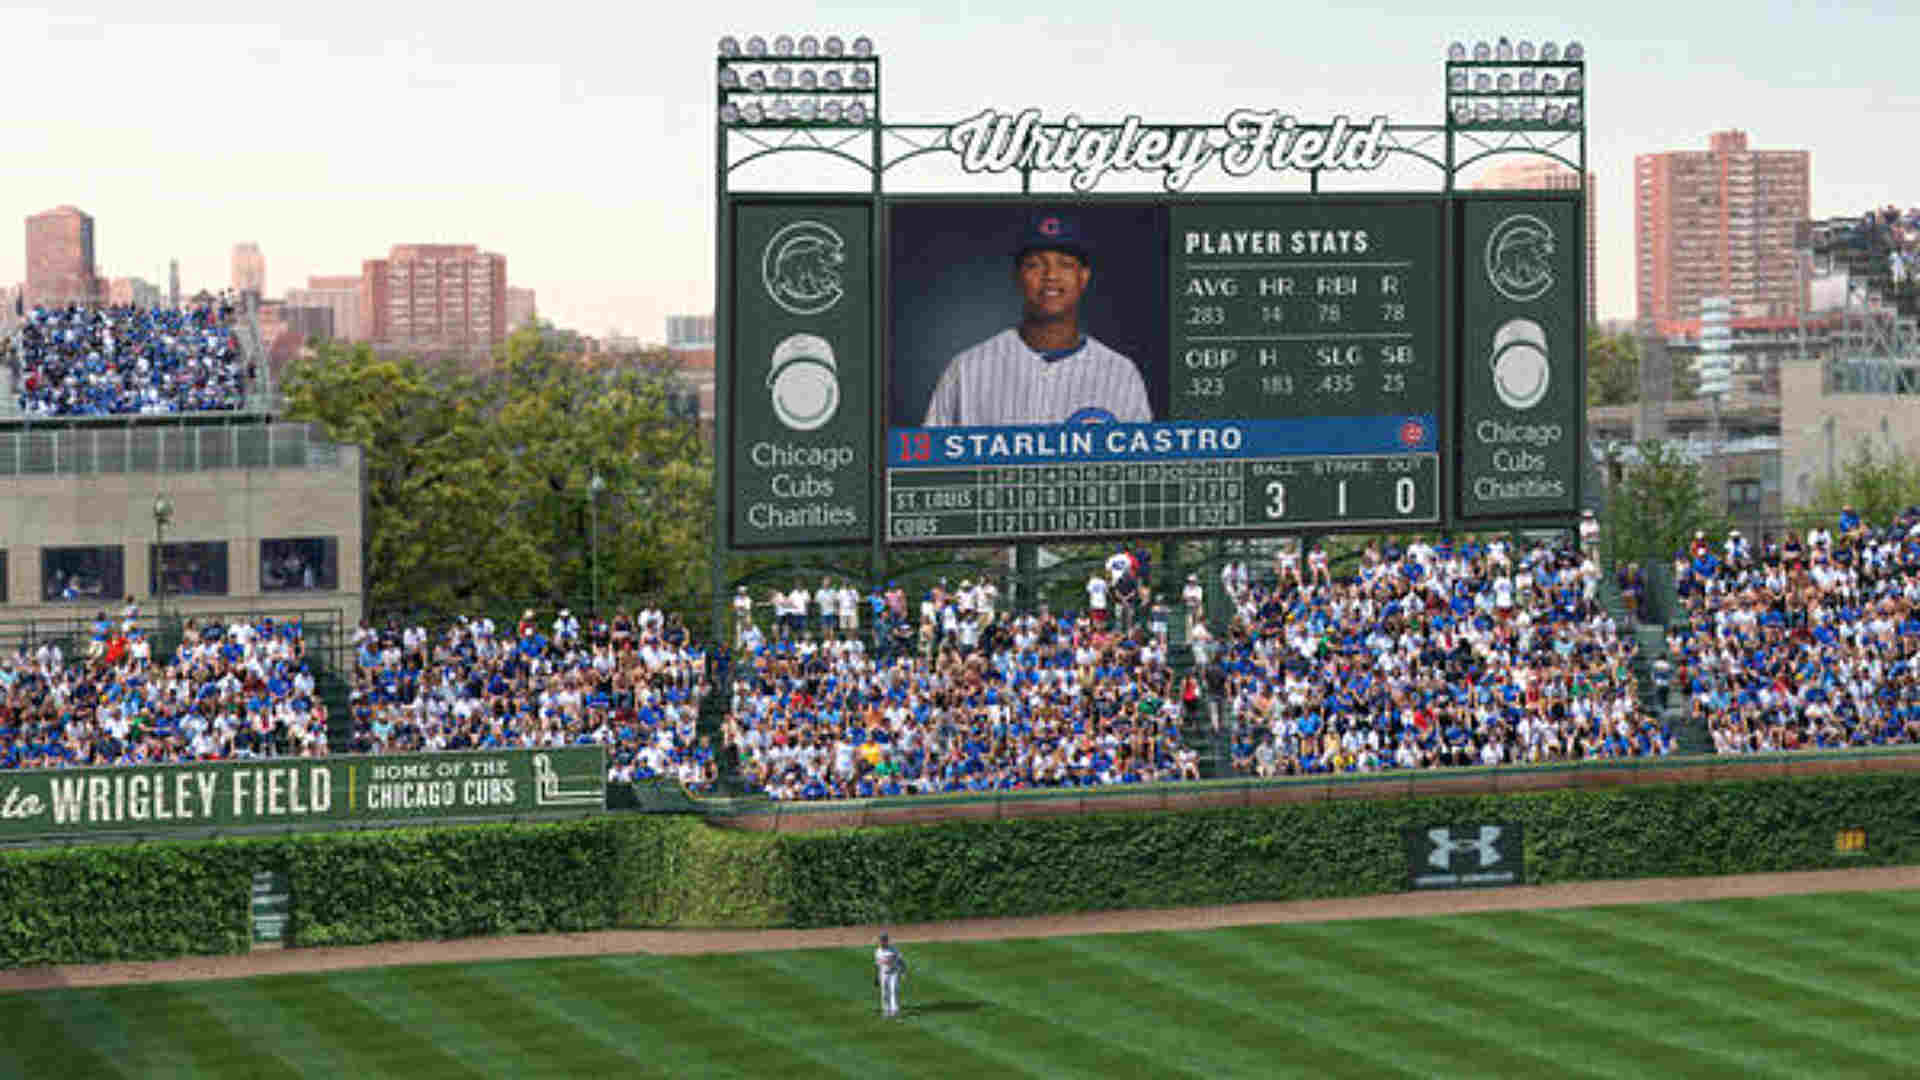 1920x1080 Wednesday night marks end of an era at Wrigley Field